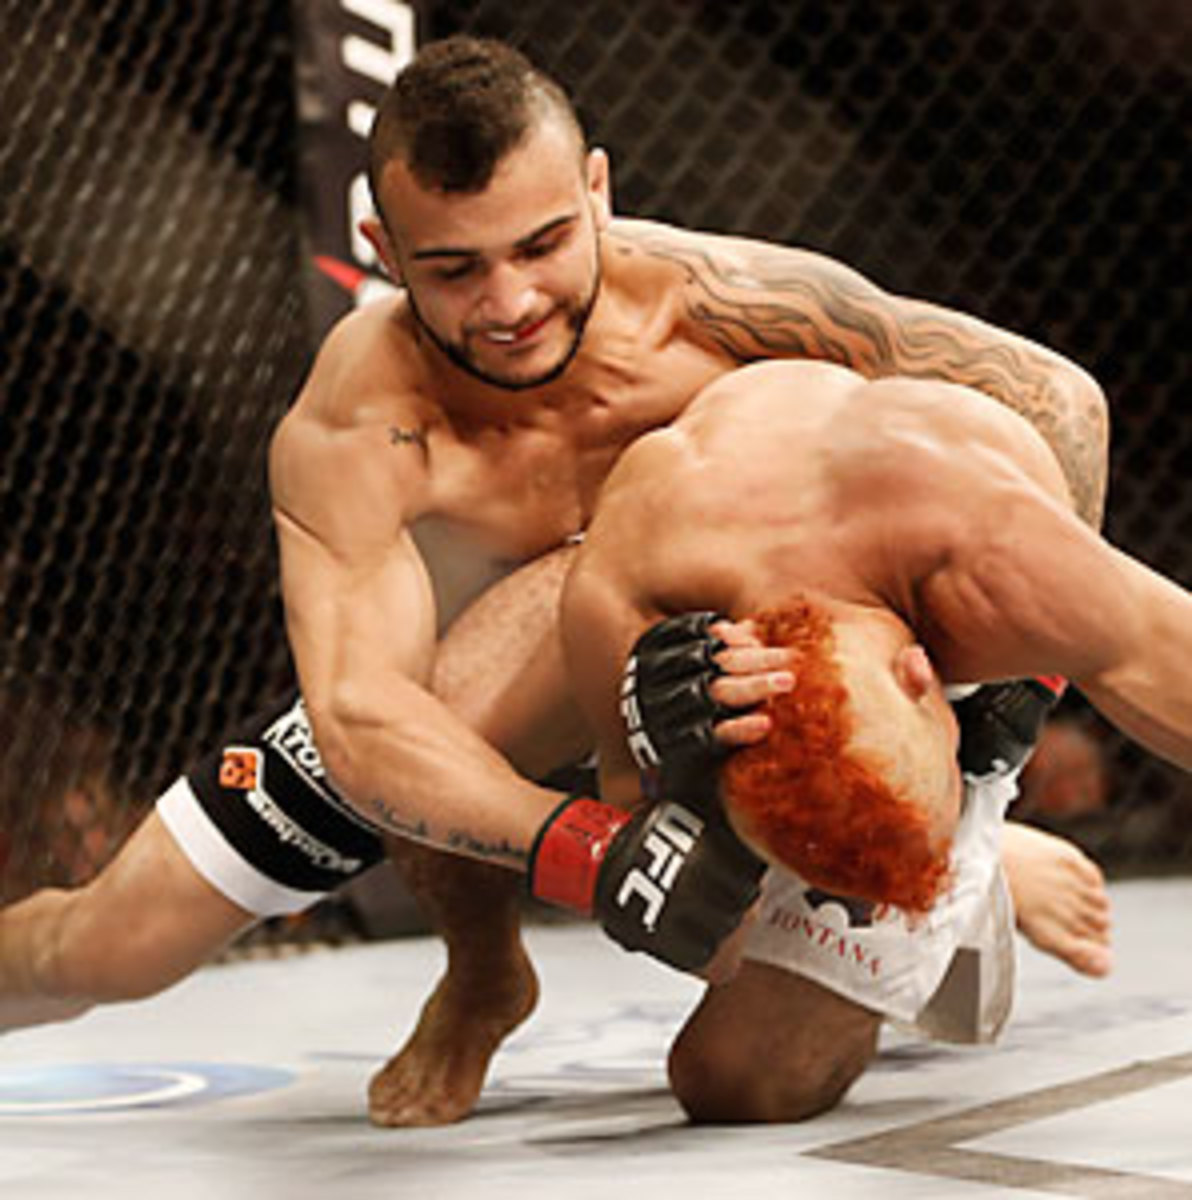 John Lineker improved his record to 22-6 after a second round TKO of Jose Maria at UFC 163.